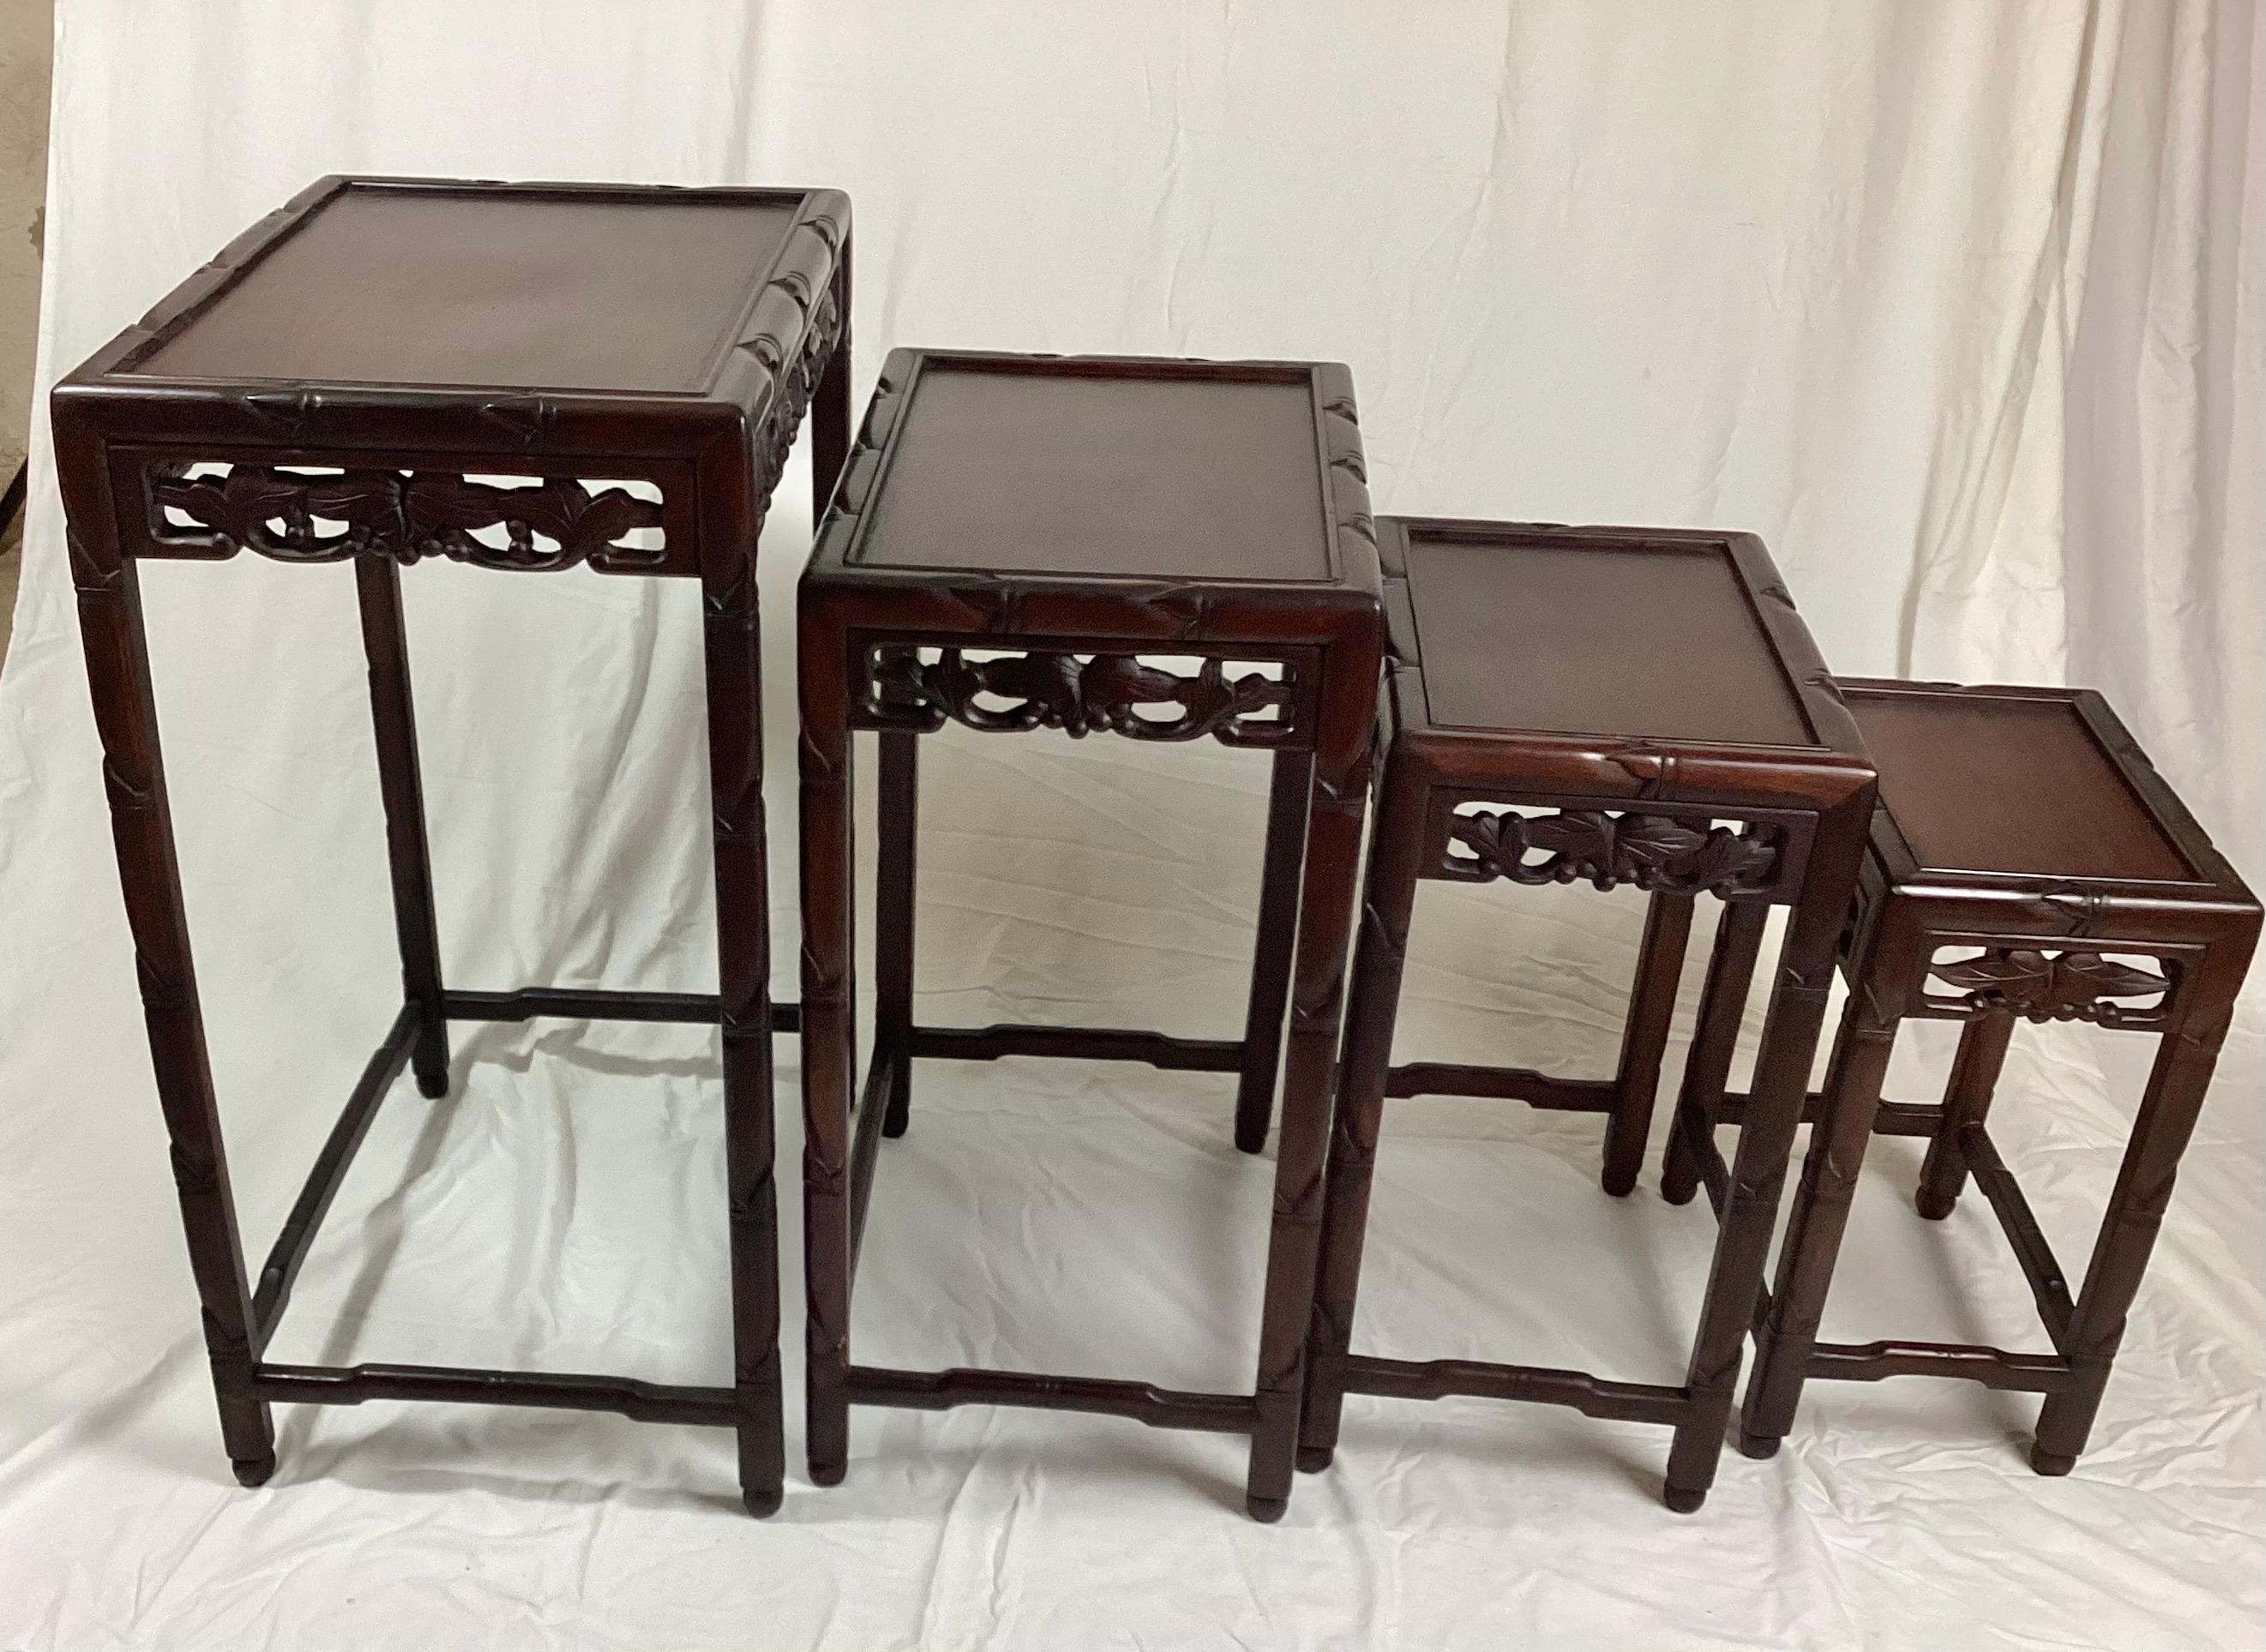 20th Century Chinese Rosewood Set of 4 Nesting Tables with Carved Frieze Decoration For Sale